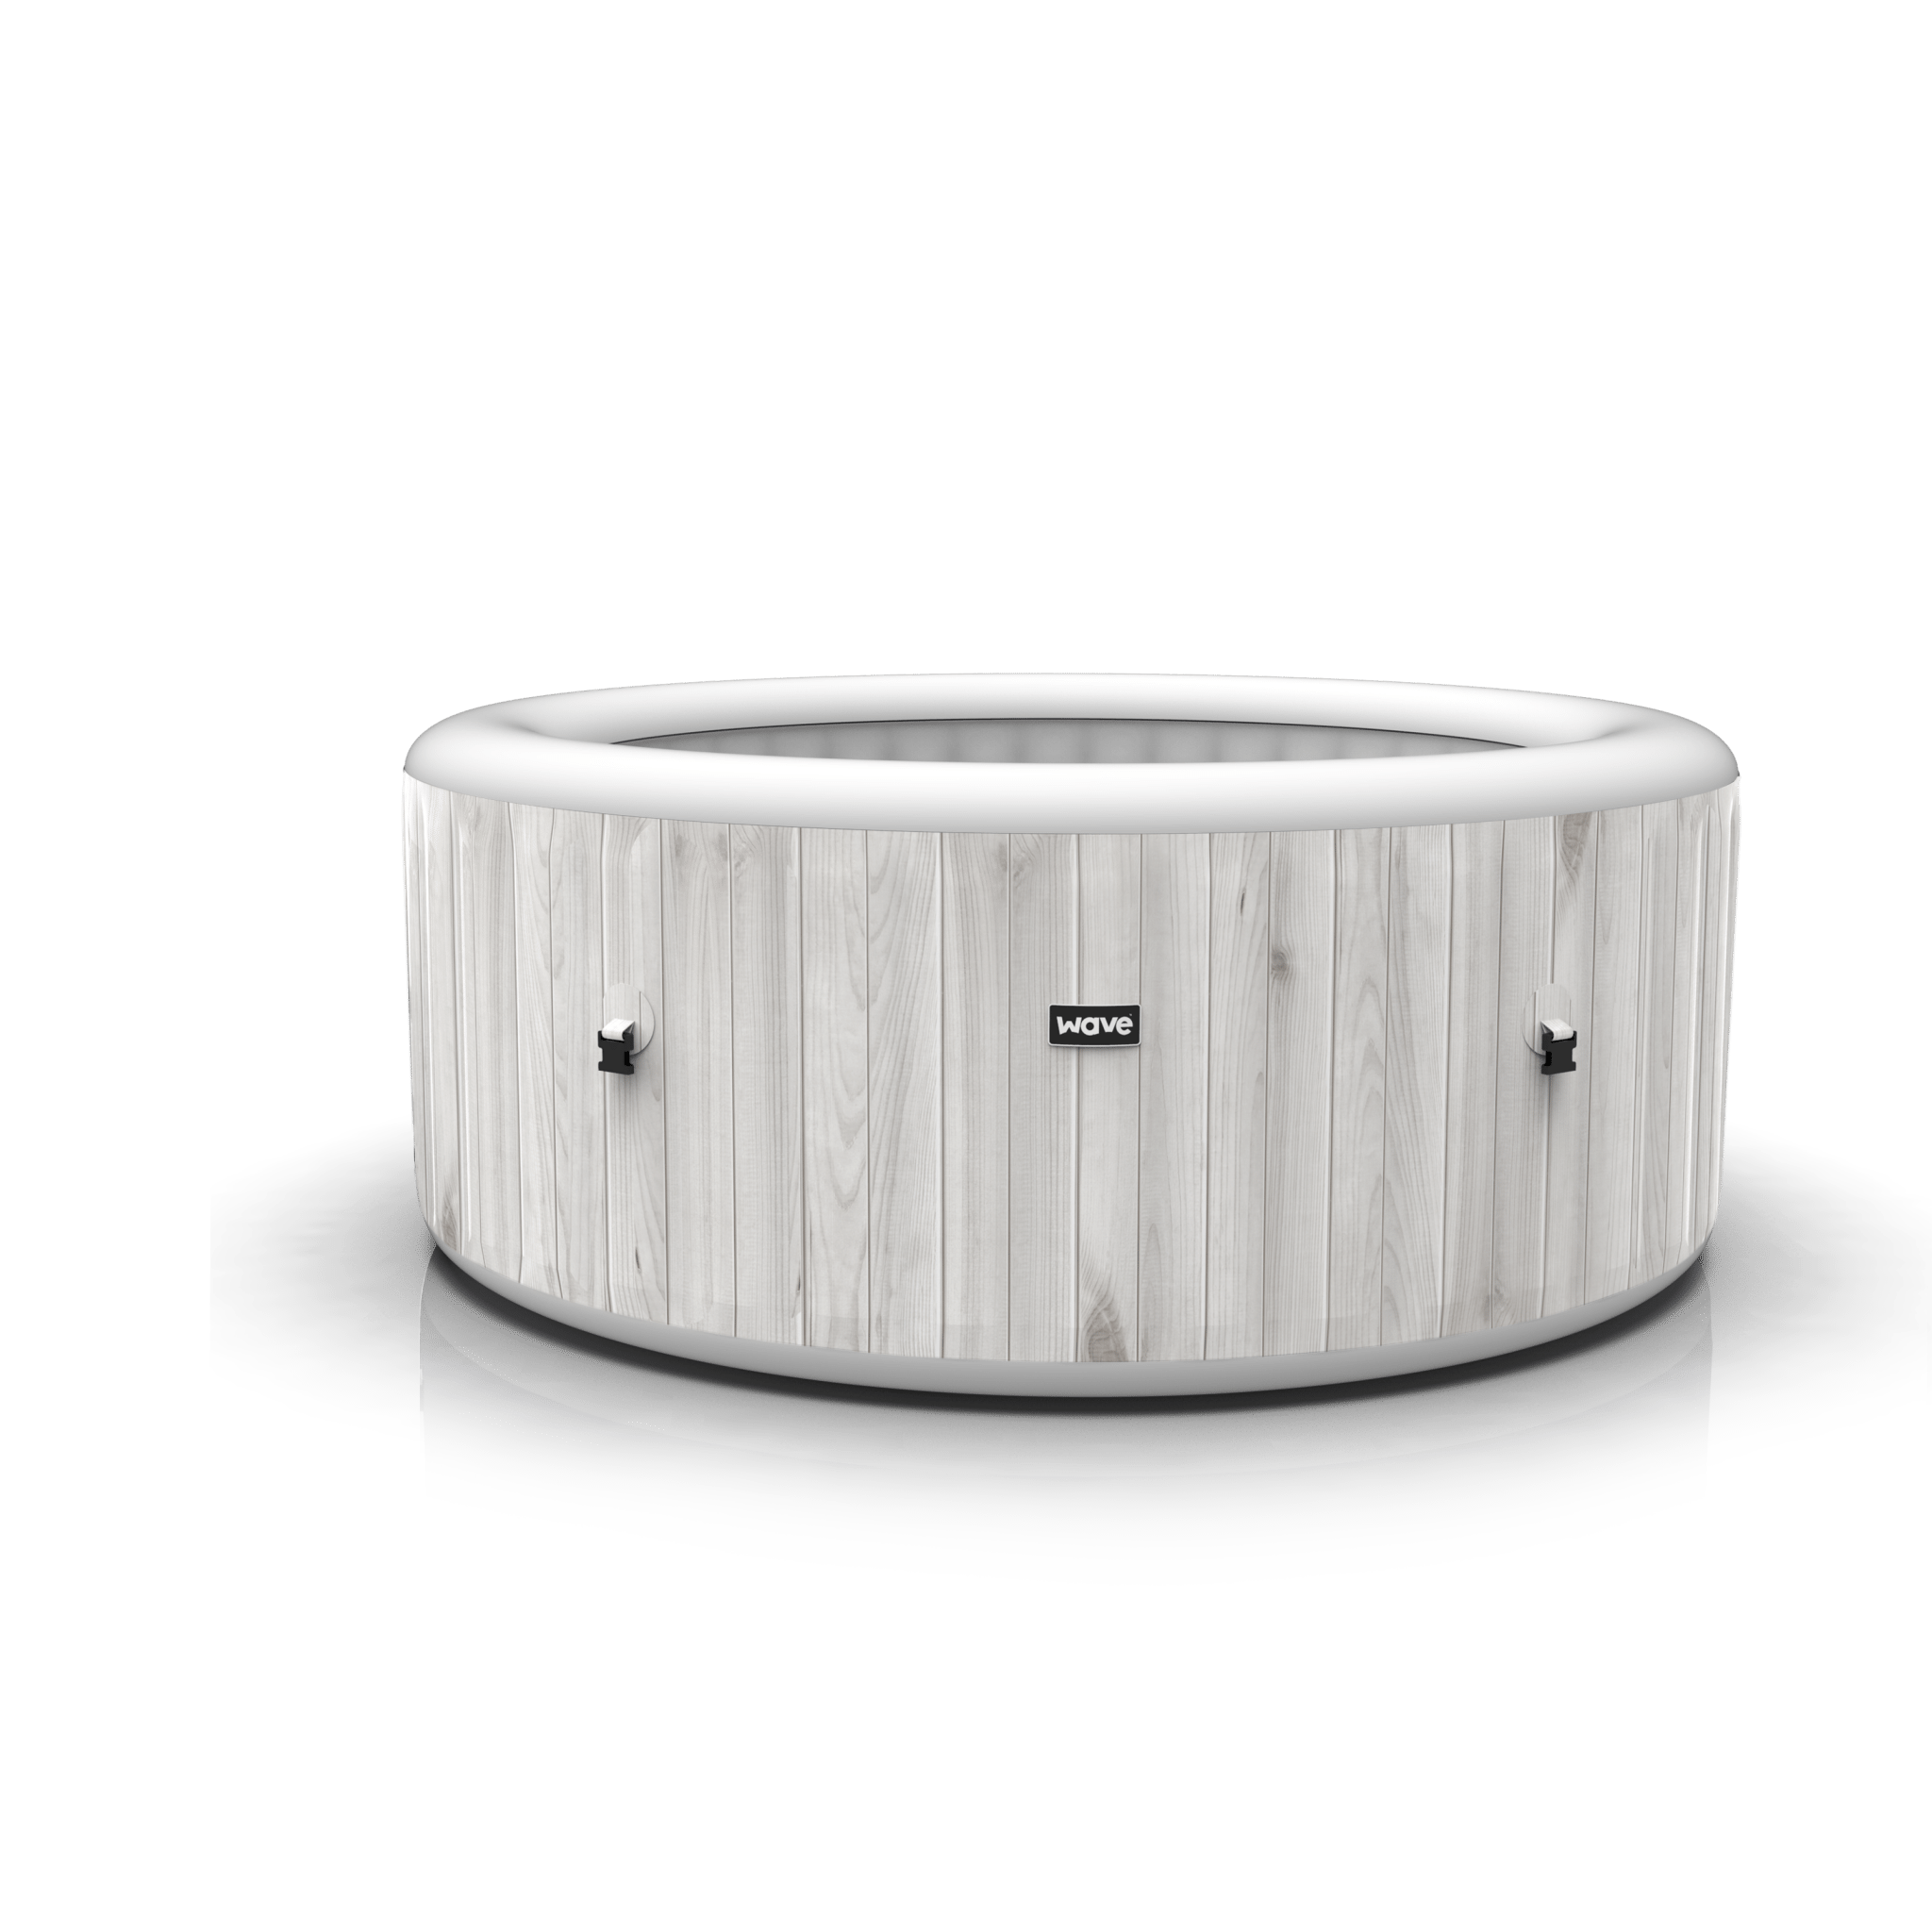 Wave Spa Atlantic Plus 6 Person White Wood External Liner - Body Replacement - Hot Tub Liner - Wave Spas USA